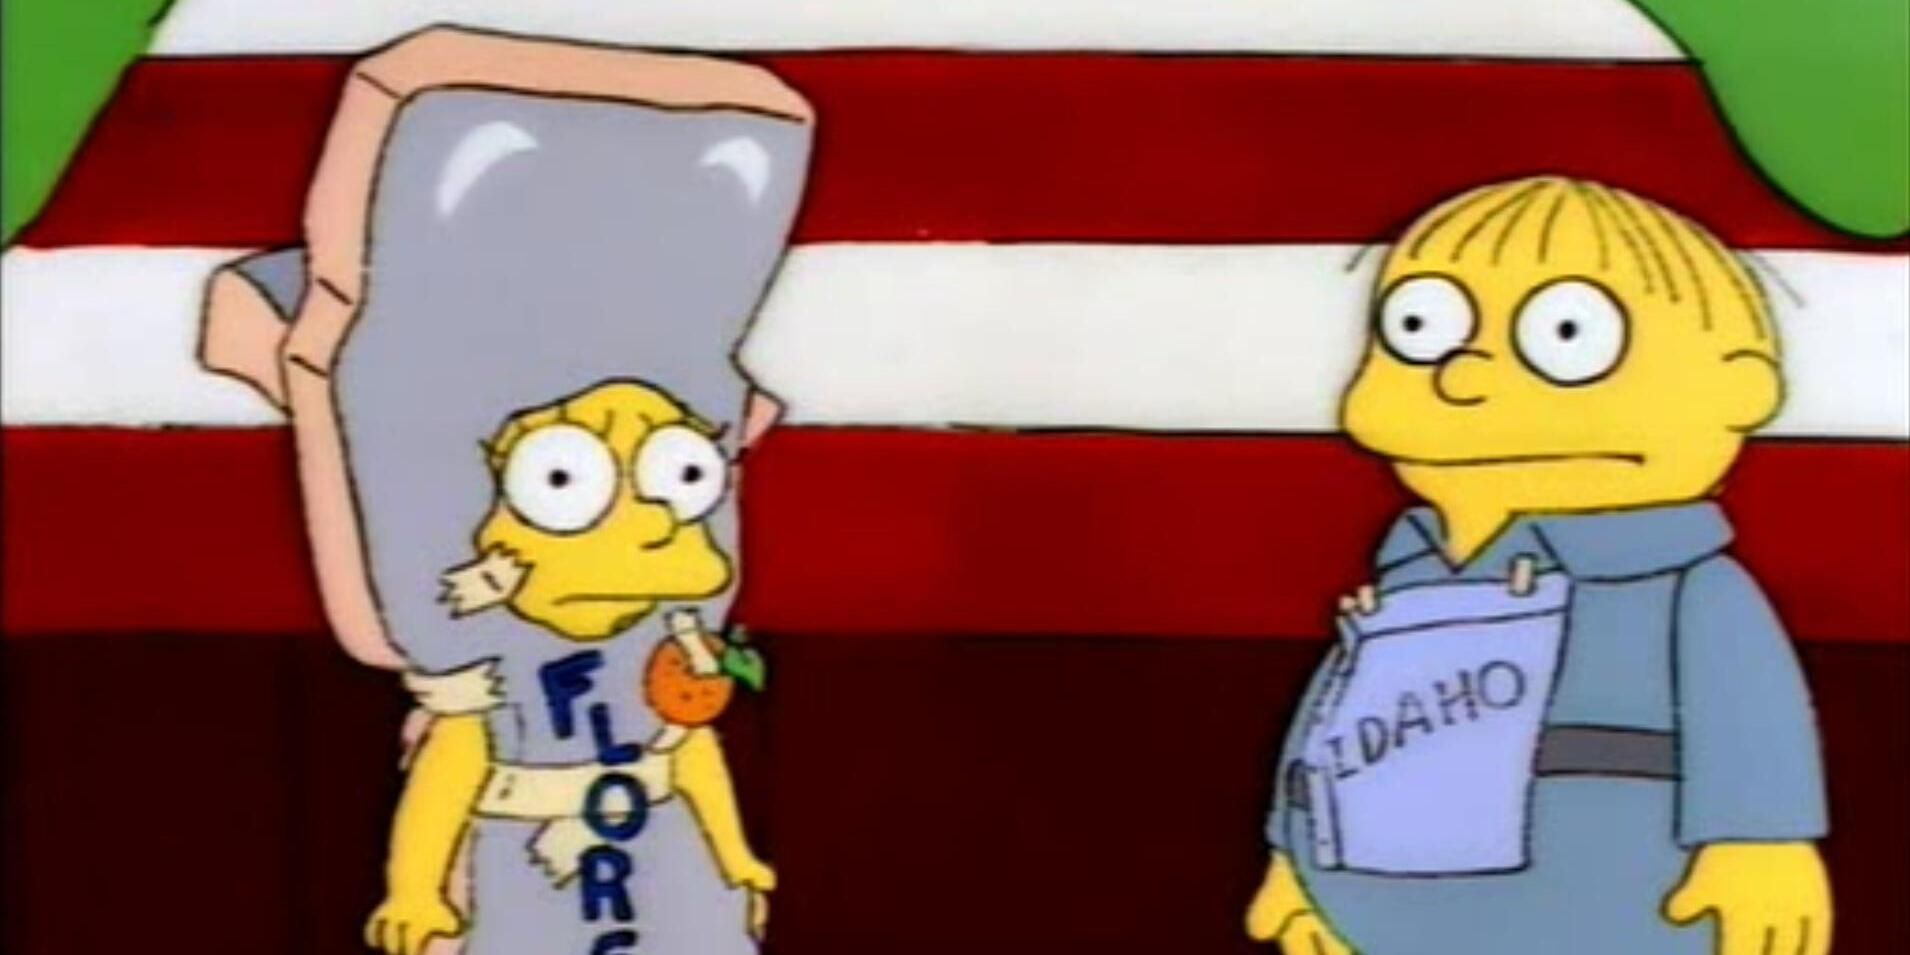 Lisa Simpson dressed up as Florida next to Ralph Wiggum dressed up as Idaho in the Simpsons episode "$pringfield (Or, How I Learned to Stop Worrying and Love Legalized Gambling)"